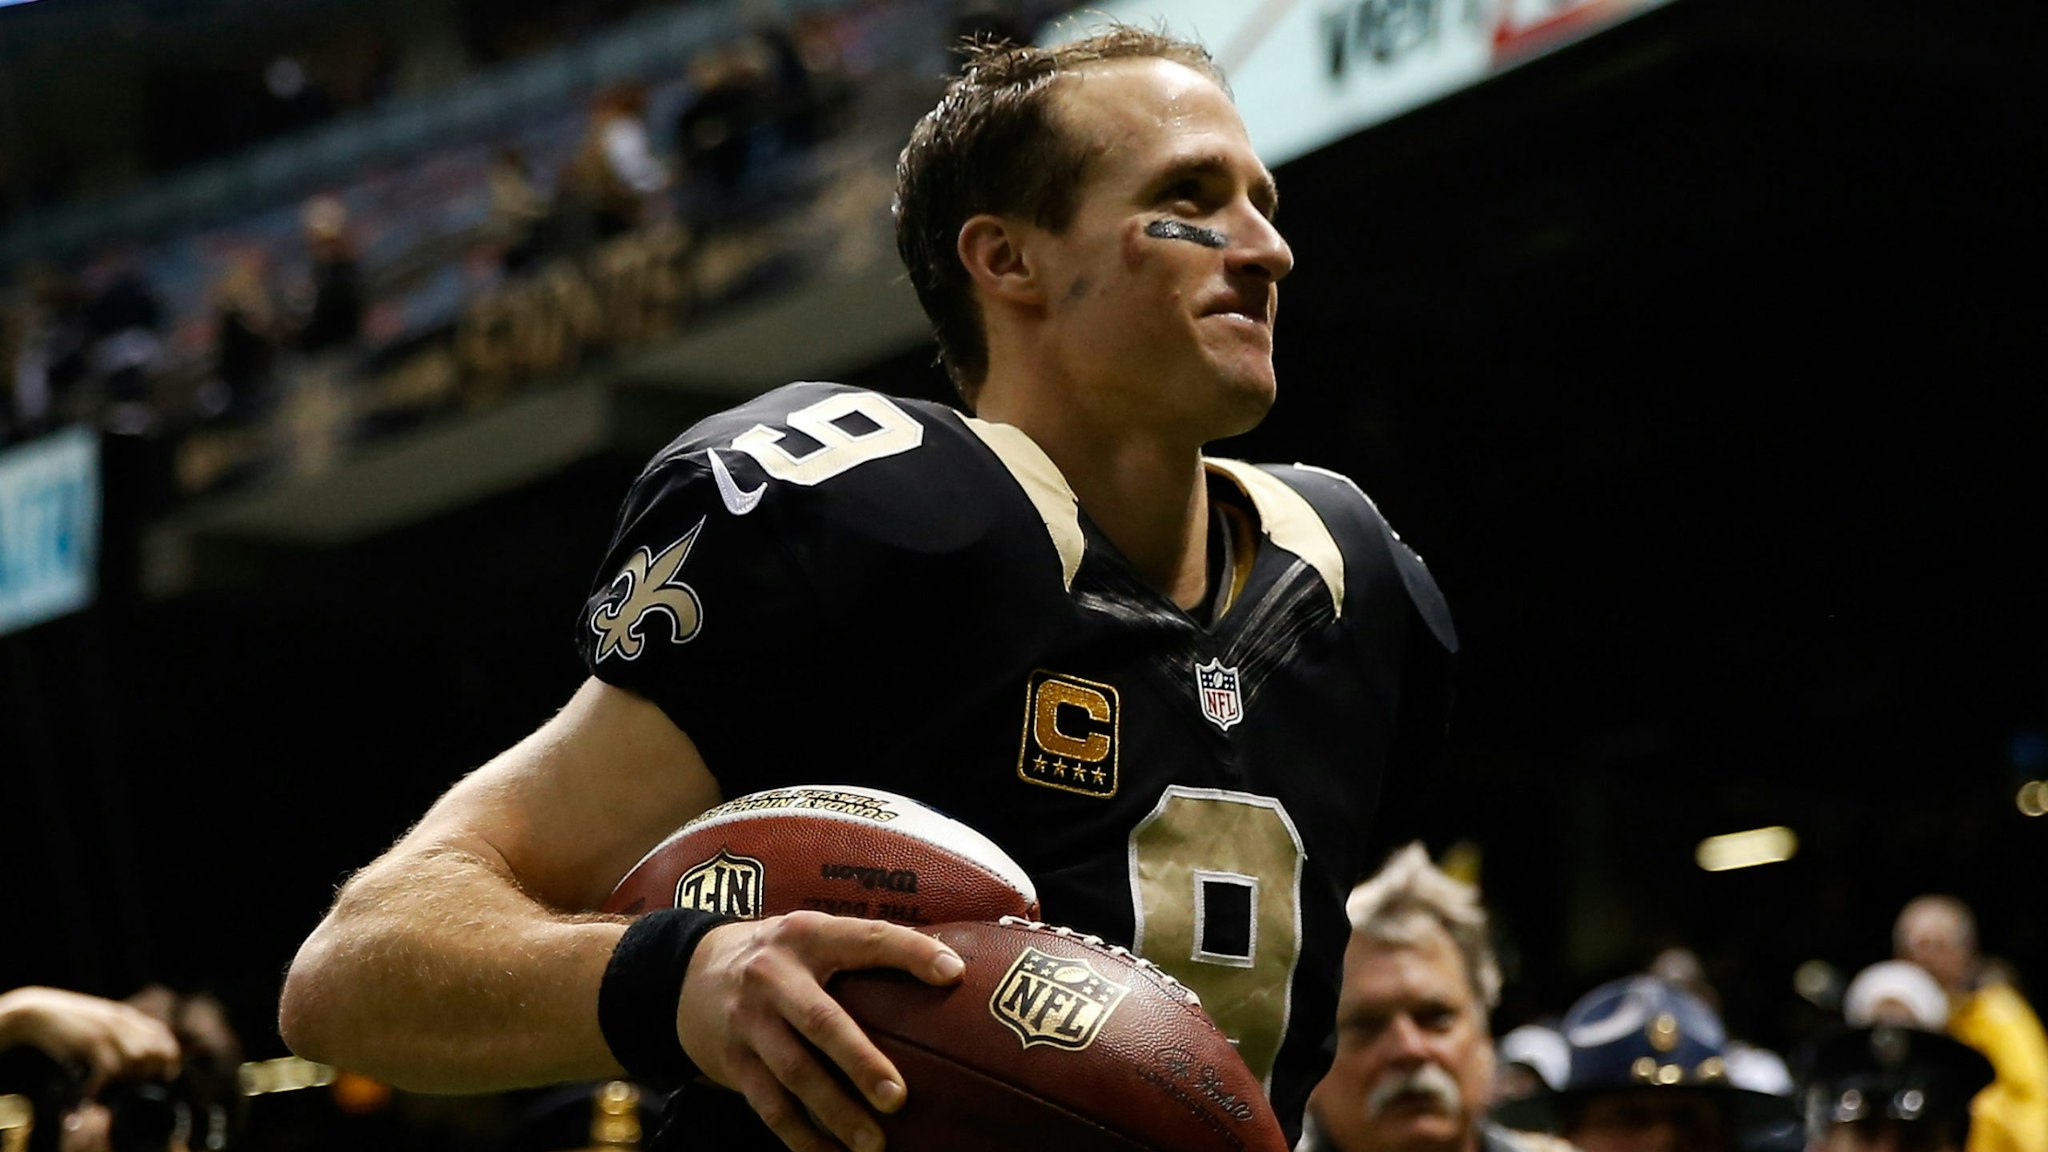 Drew Brees #9 of the New Orleans Saints celebrates after defeating the Carolina Panthers at Mercedes-Benz Superdome on December 8, 2013 in New Orleans, Louisiana.